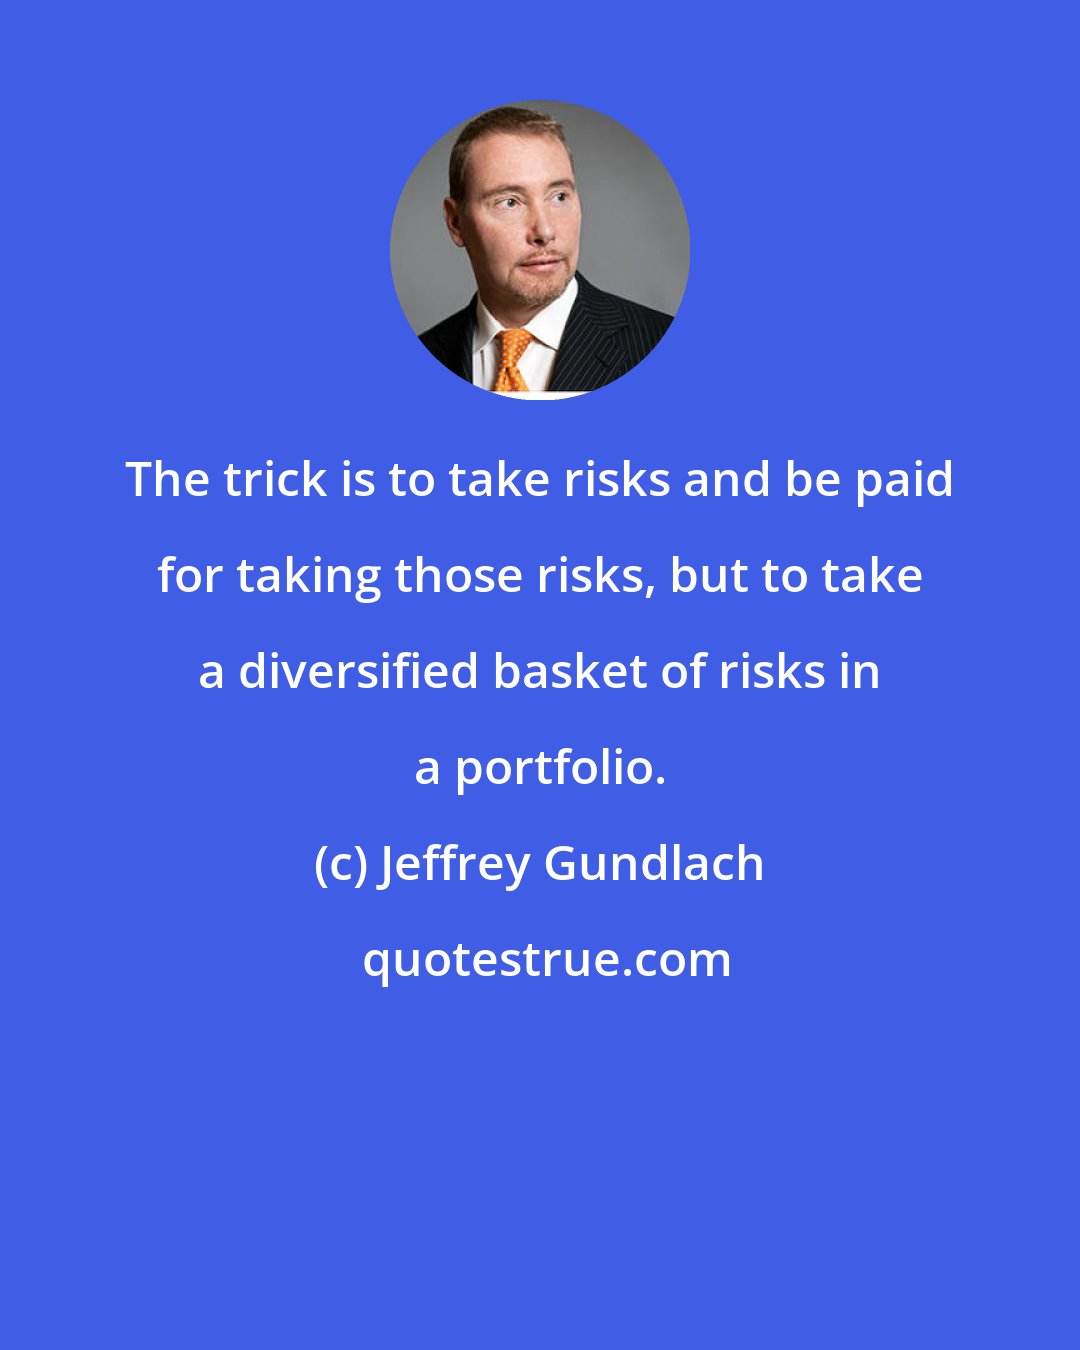 Jeffrey Gundlach: The trick is to take risks and be paid for taking those risks, but to take a diversified basket of risks in a portfolio.